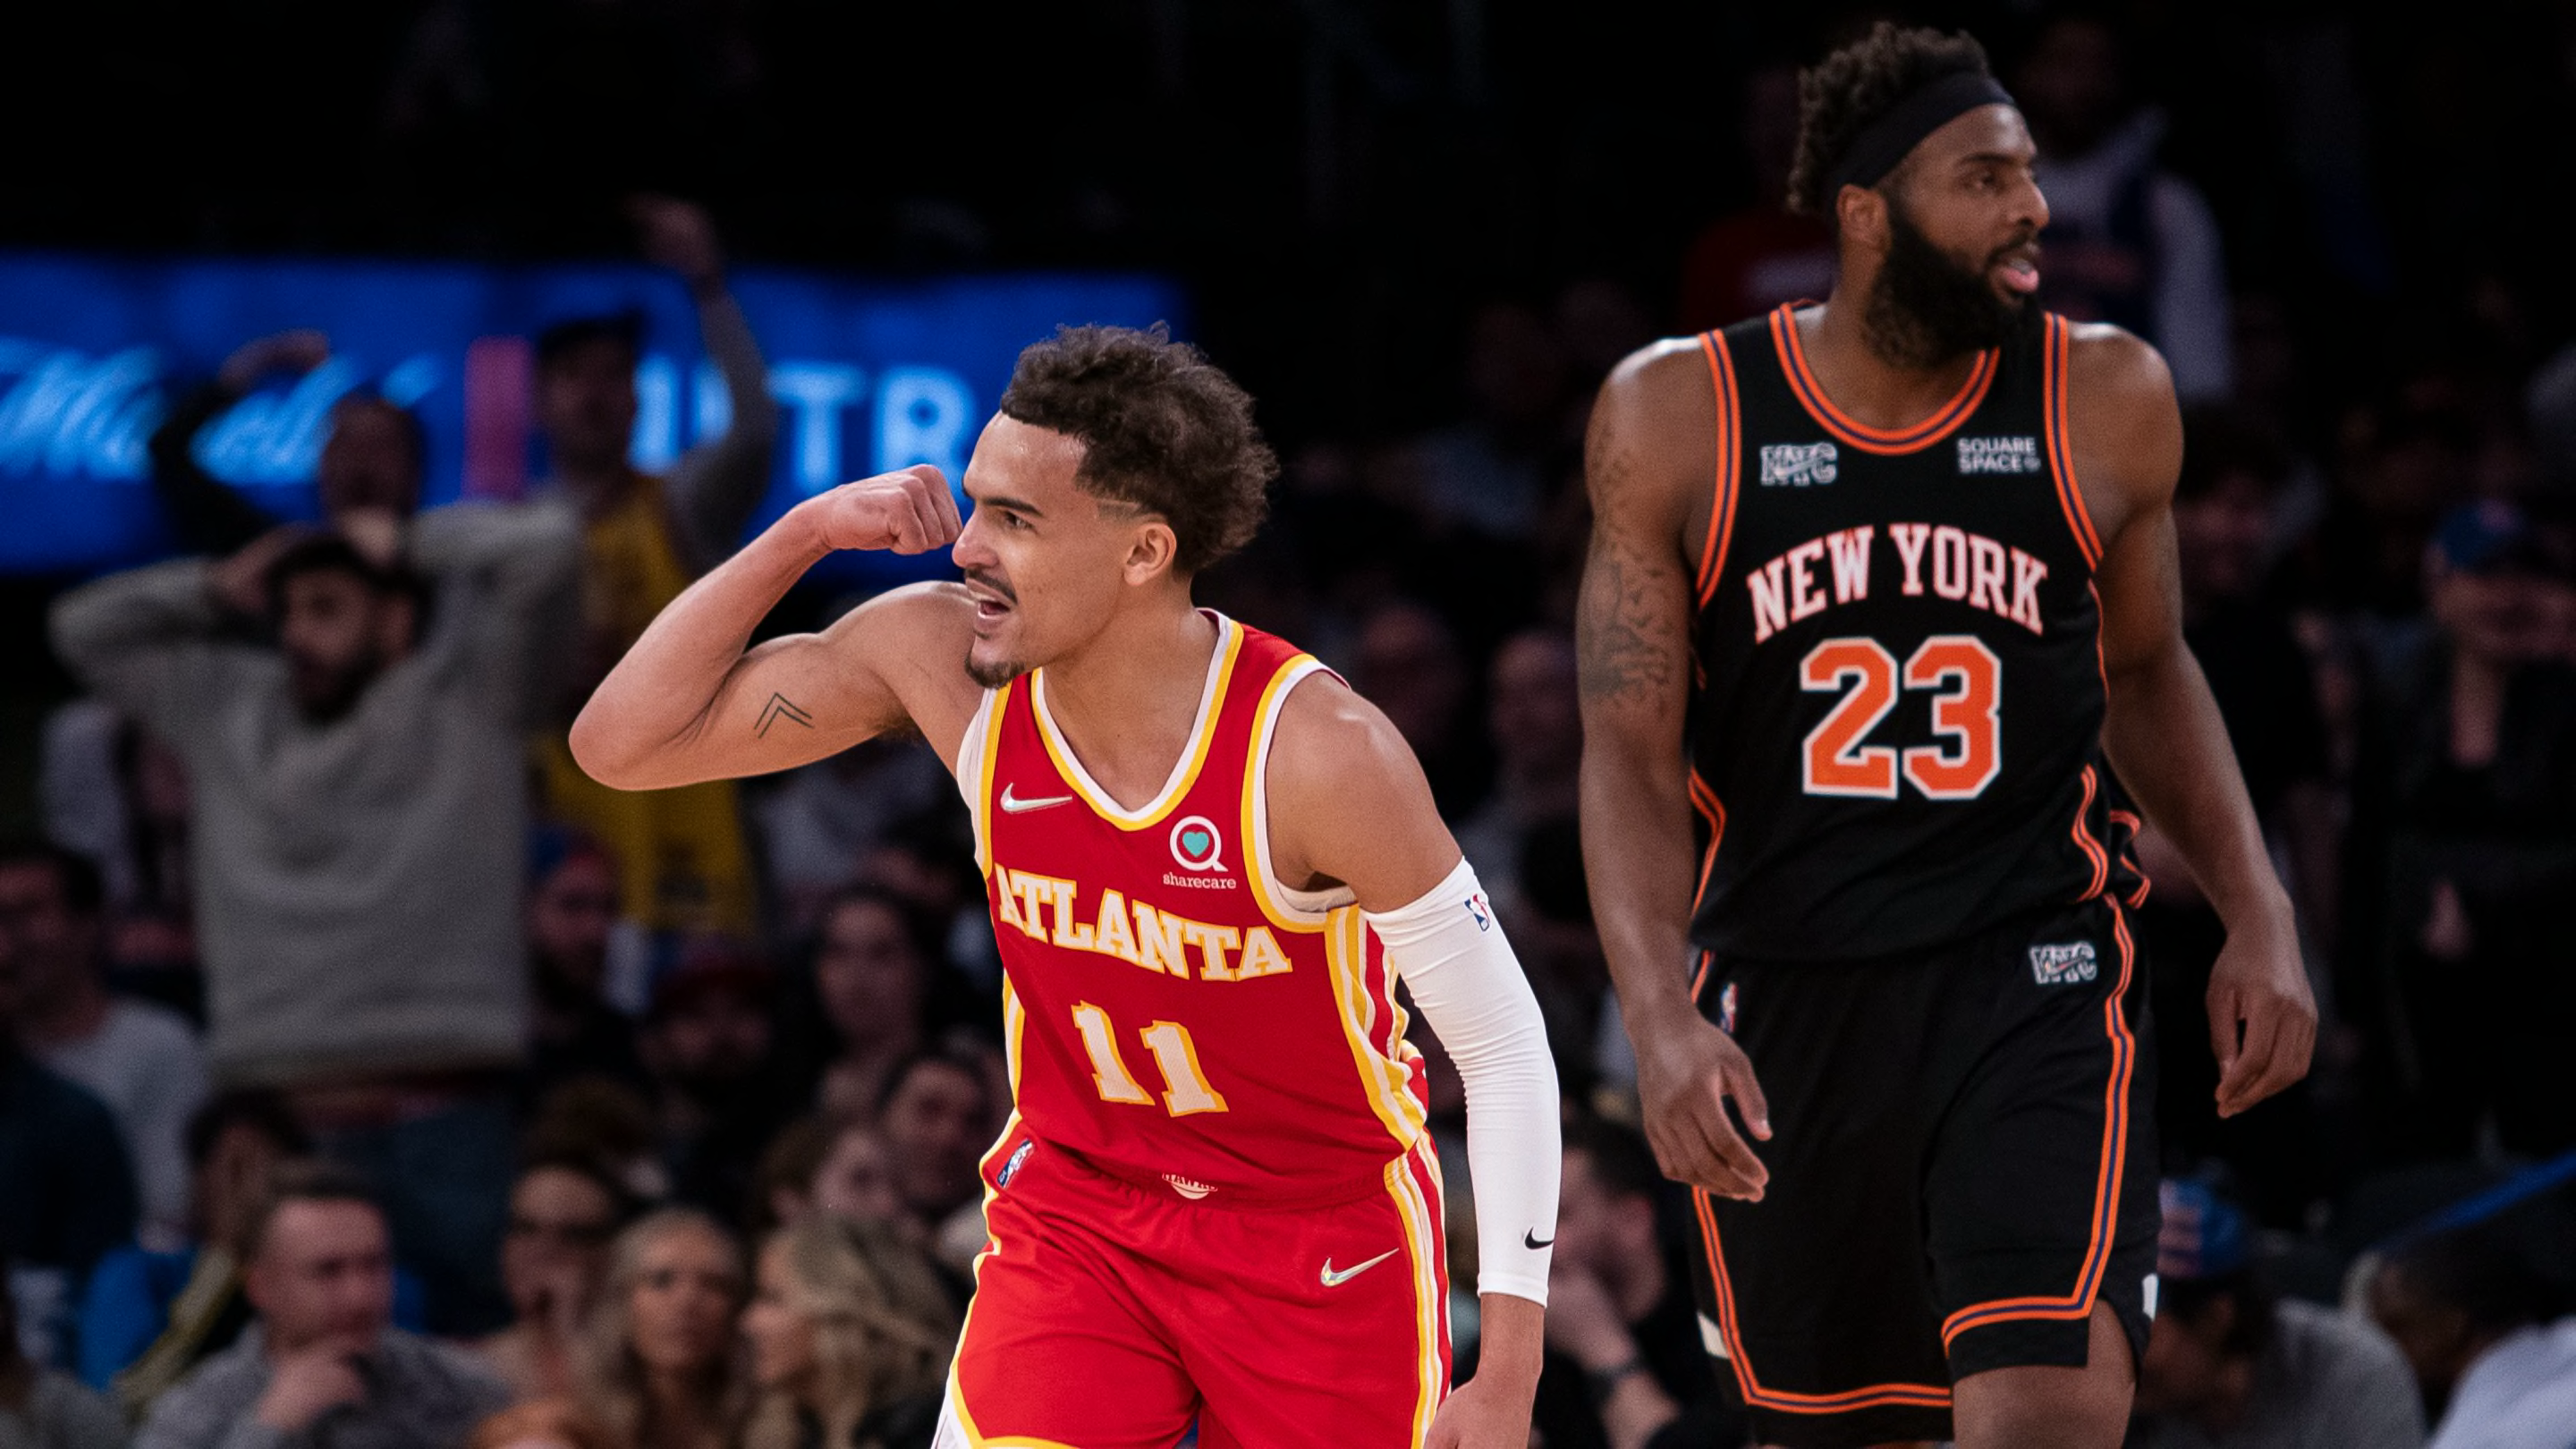 Yankees Fans Chanted 'F Trae Young' For Some Reason